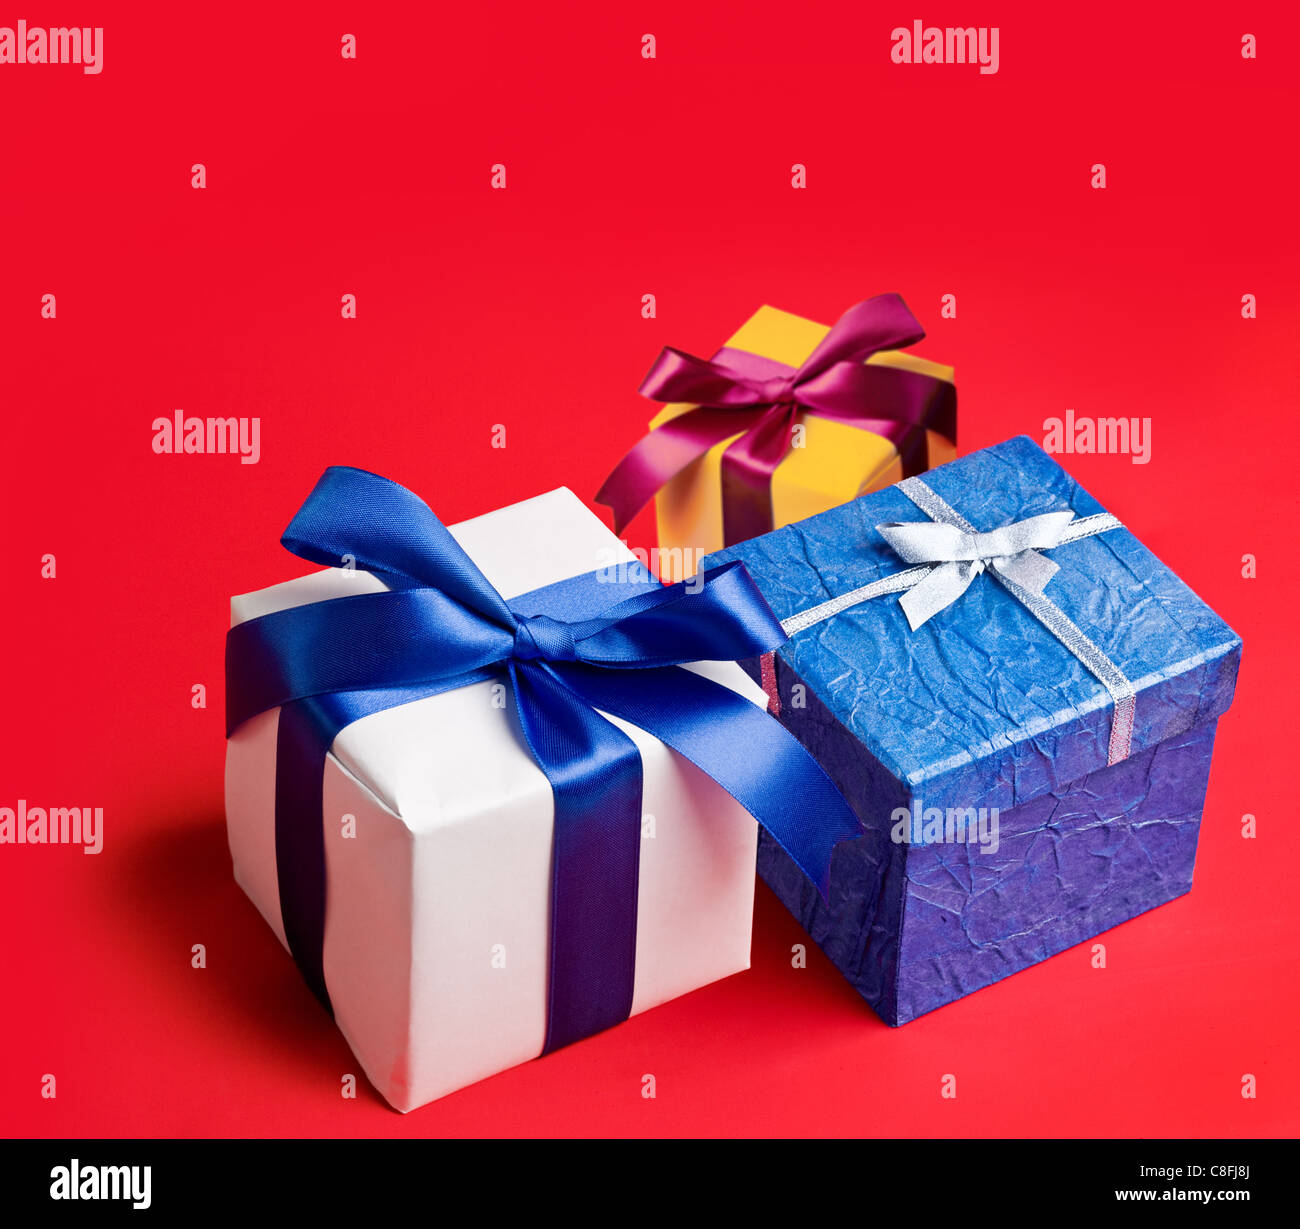 Three boxes with gifts on red background. Stock Photo